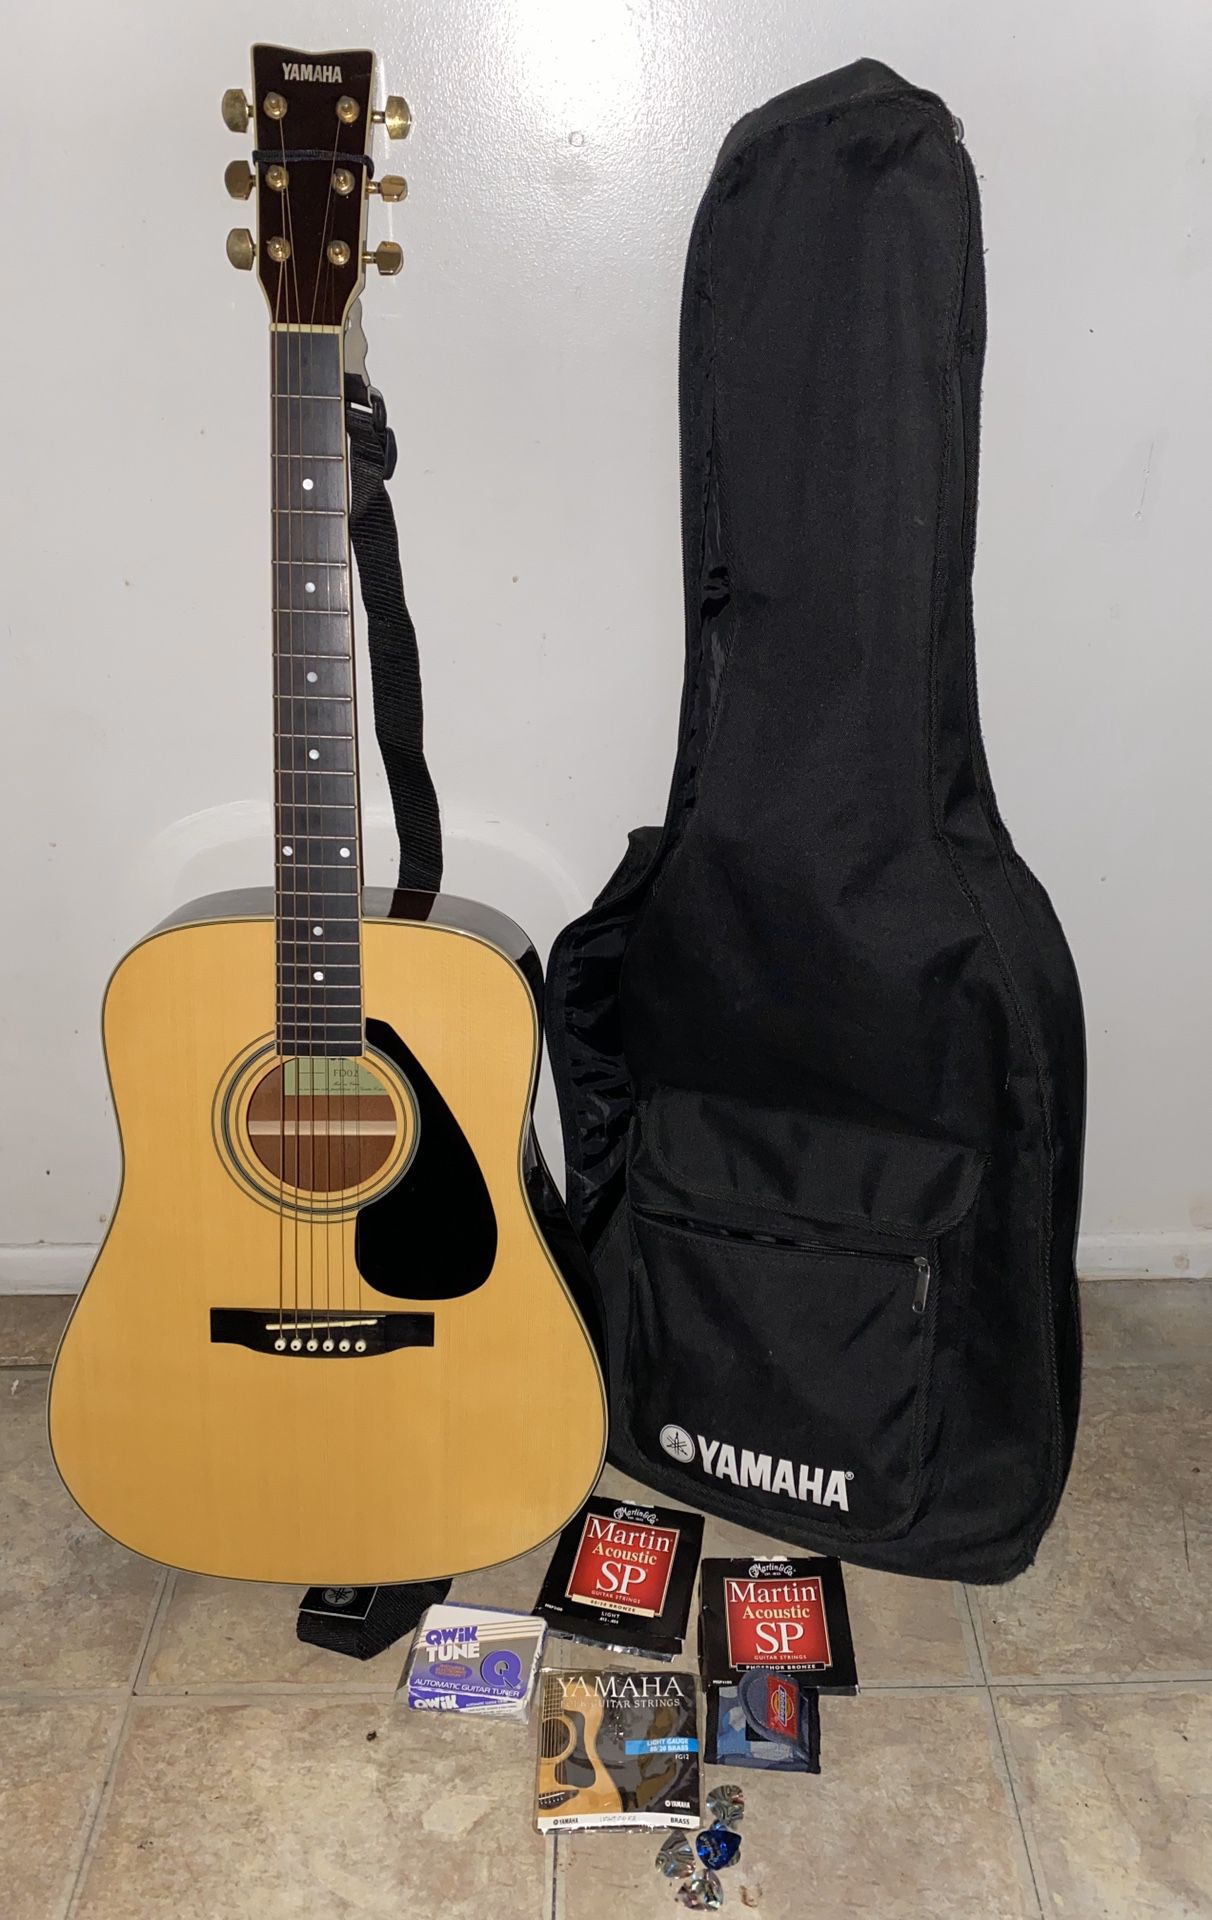 Yamaha acoustic guitar with accessories